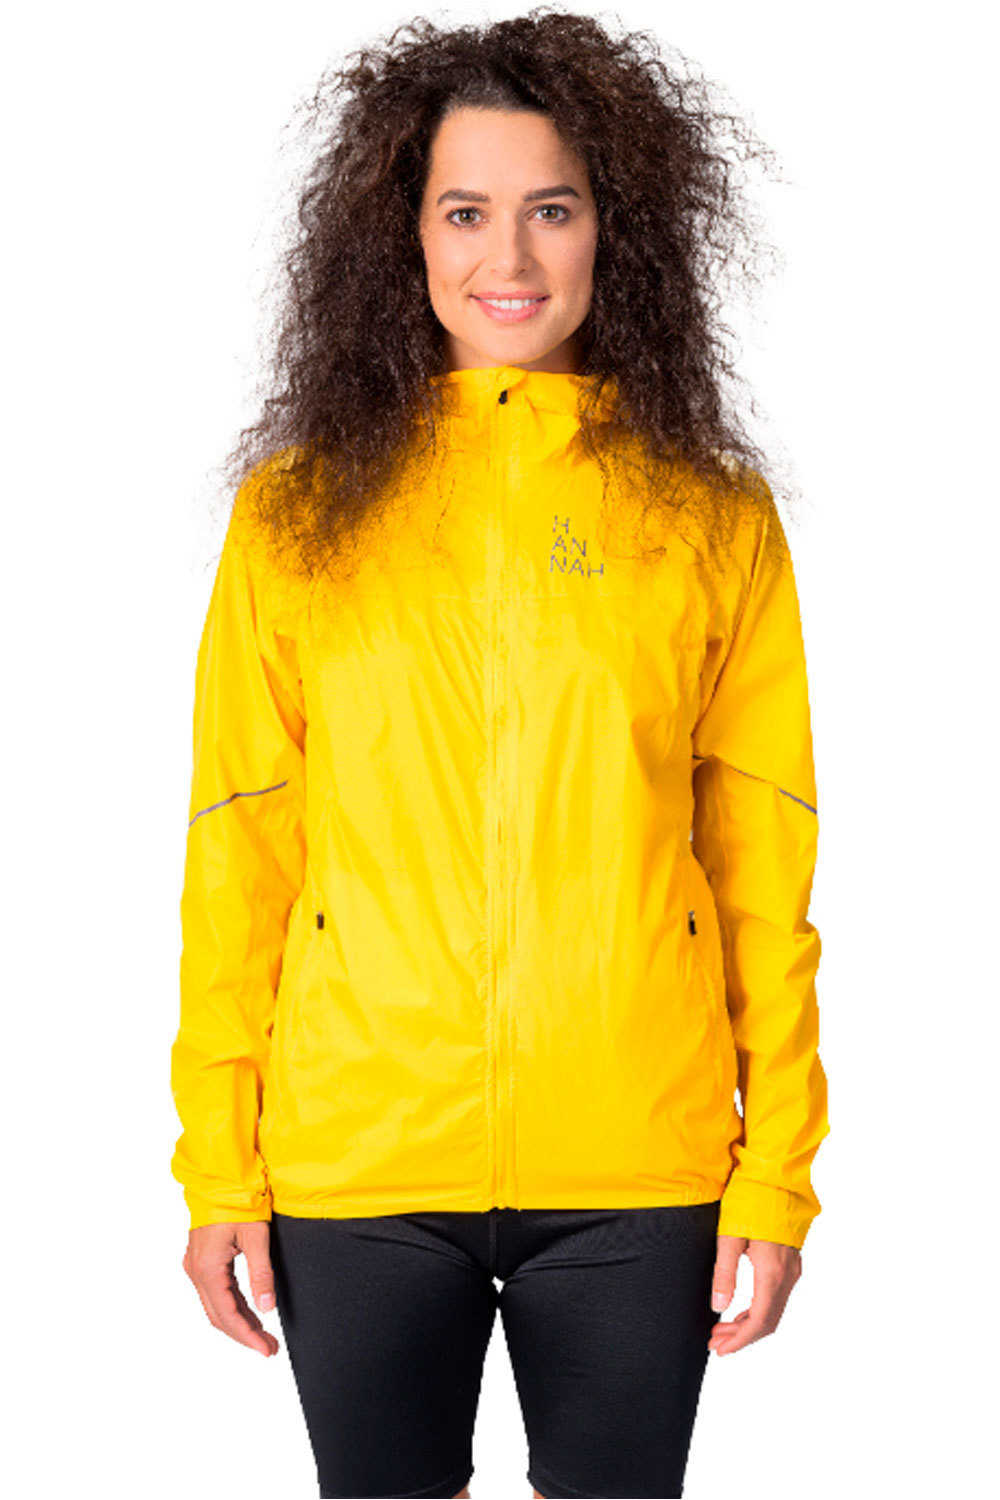 Hannah chaqueta impermeable mujer MILEY vista frontal